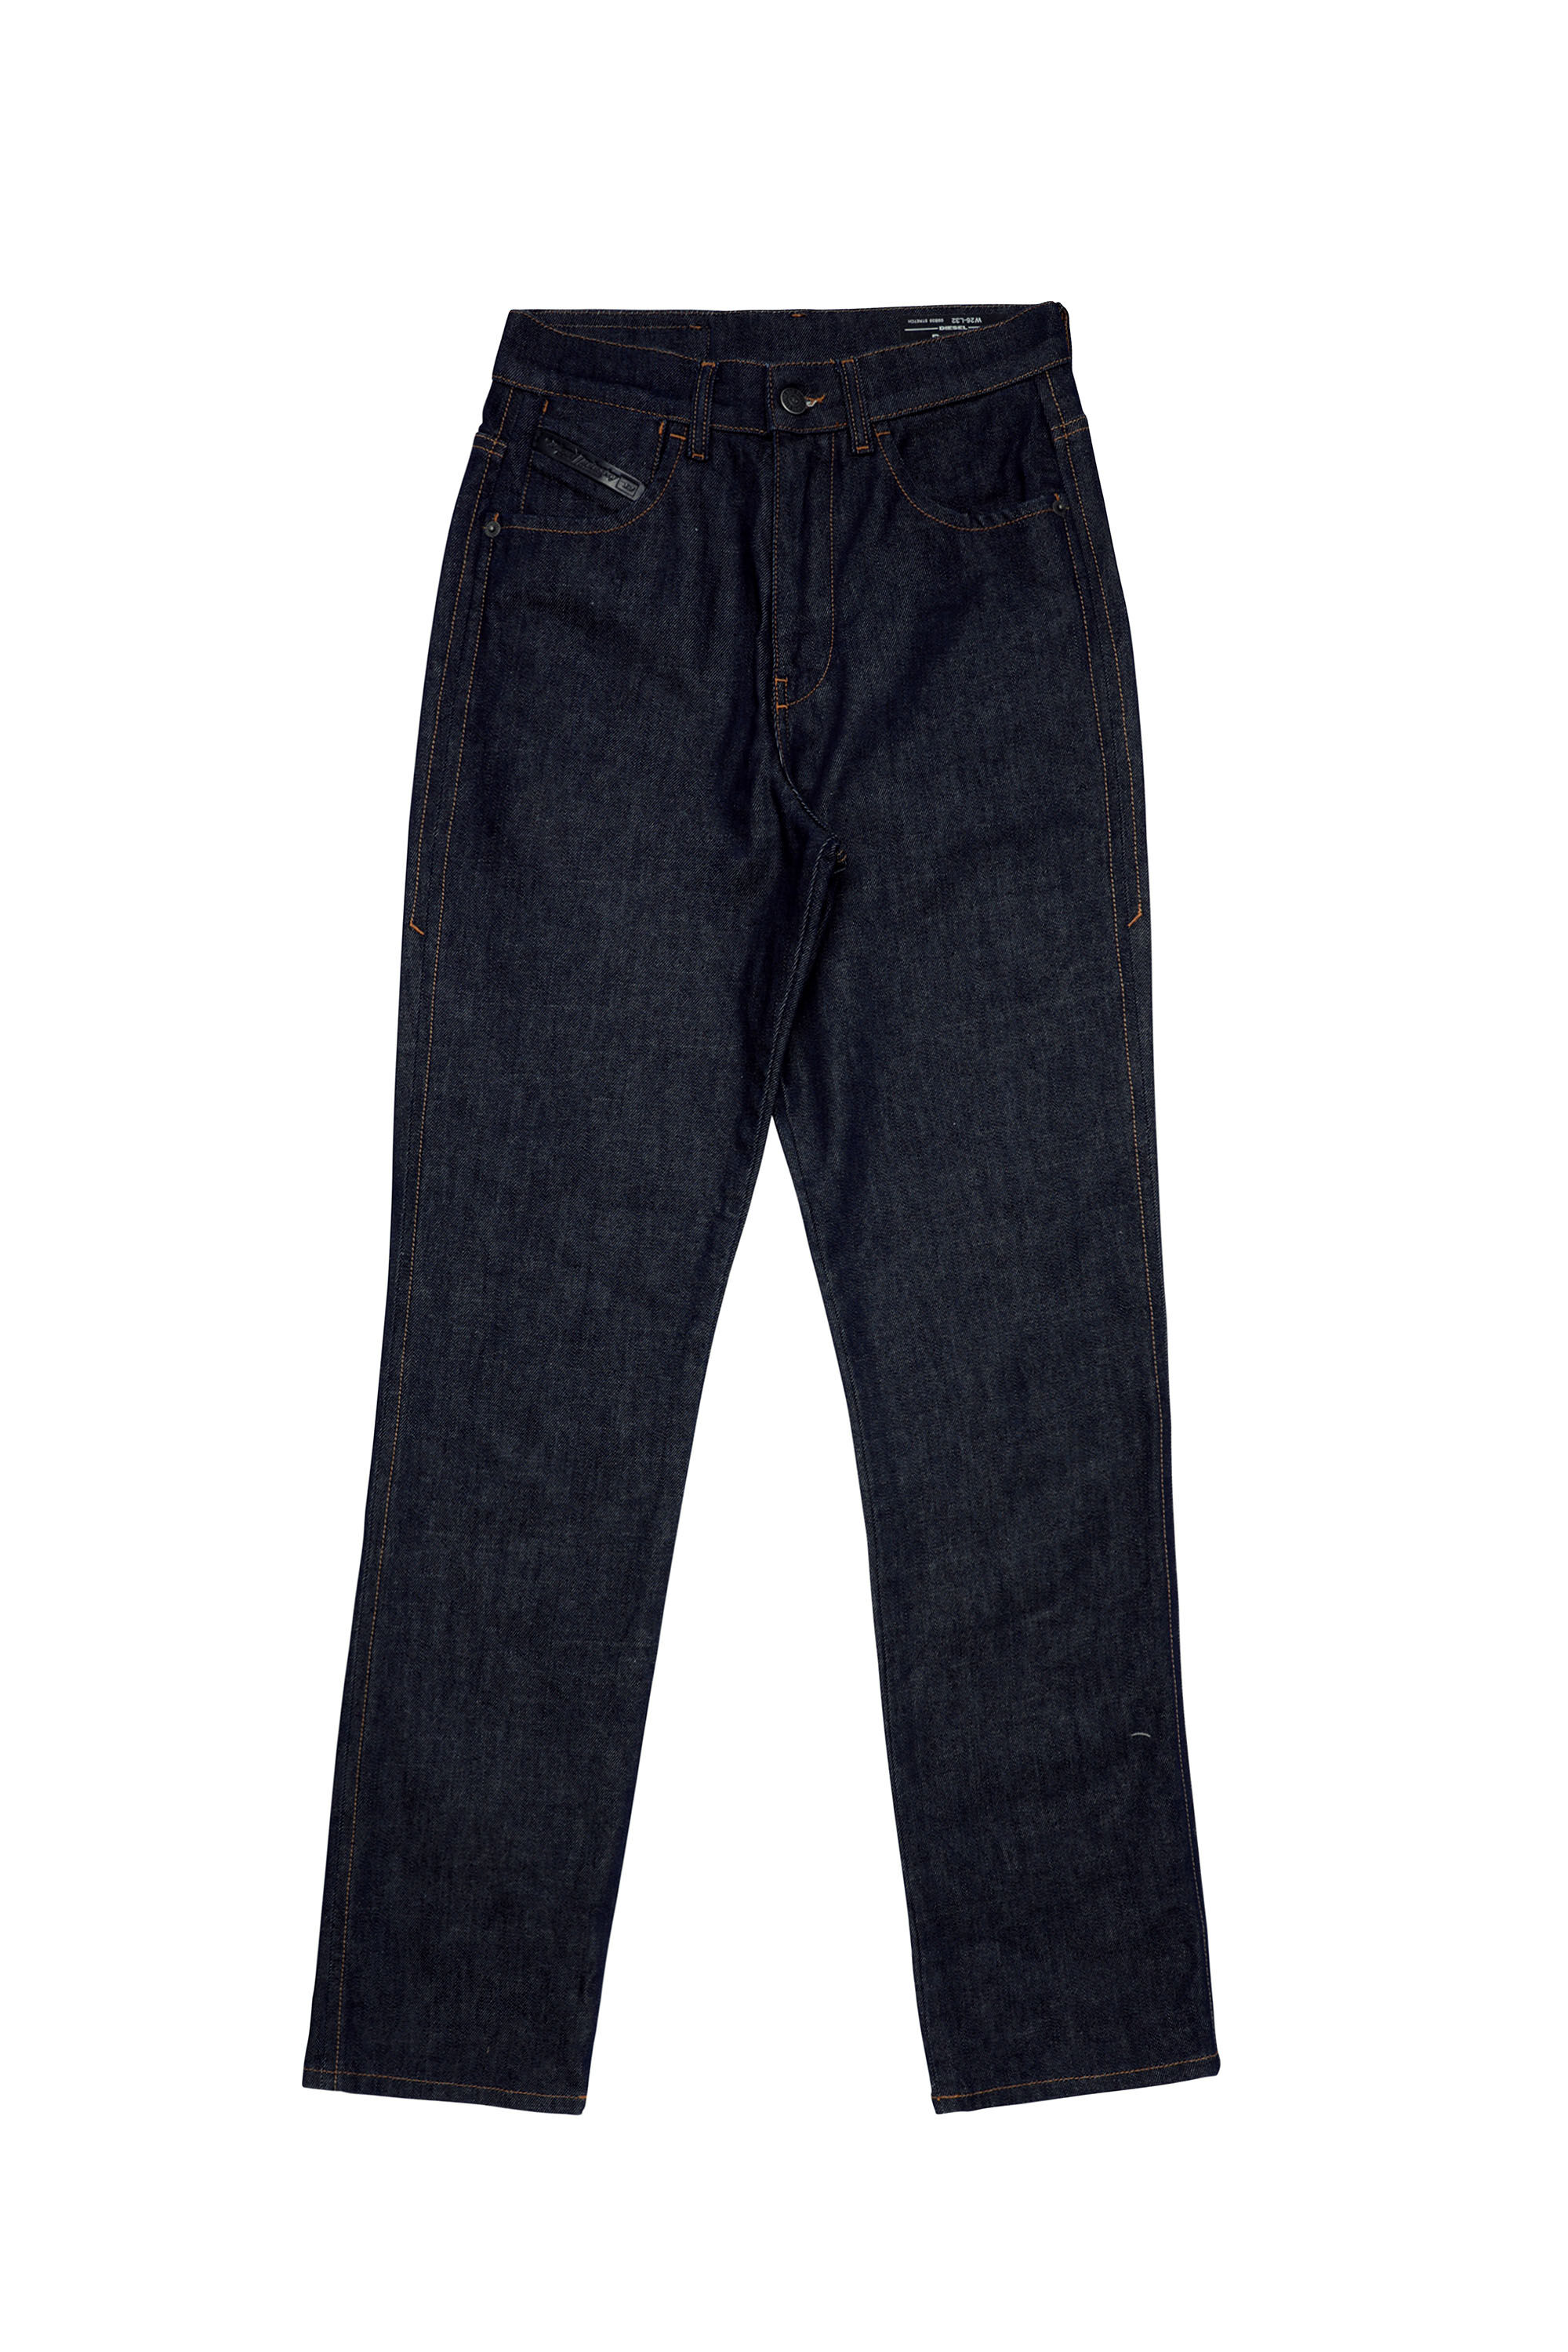 Diesel - D-Arcy 09B39 Straight Jeans,  - Image 2